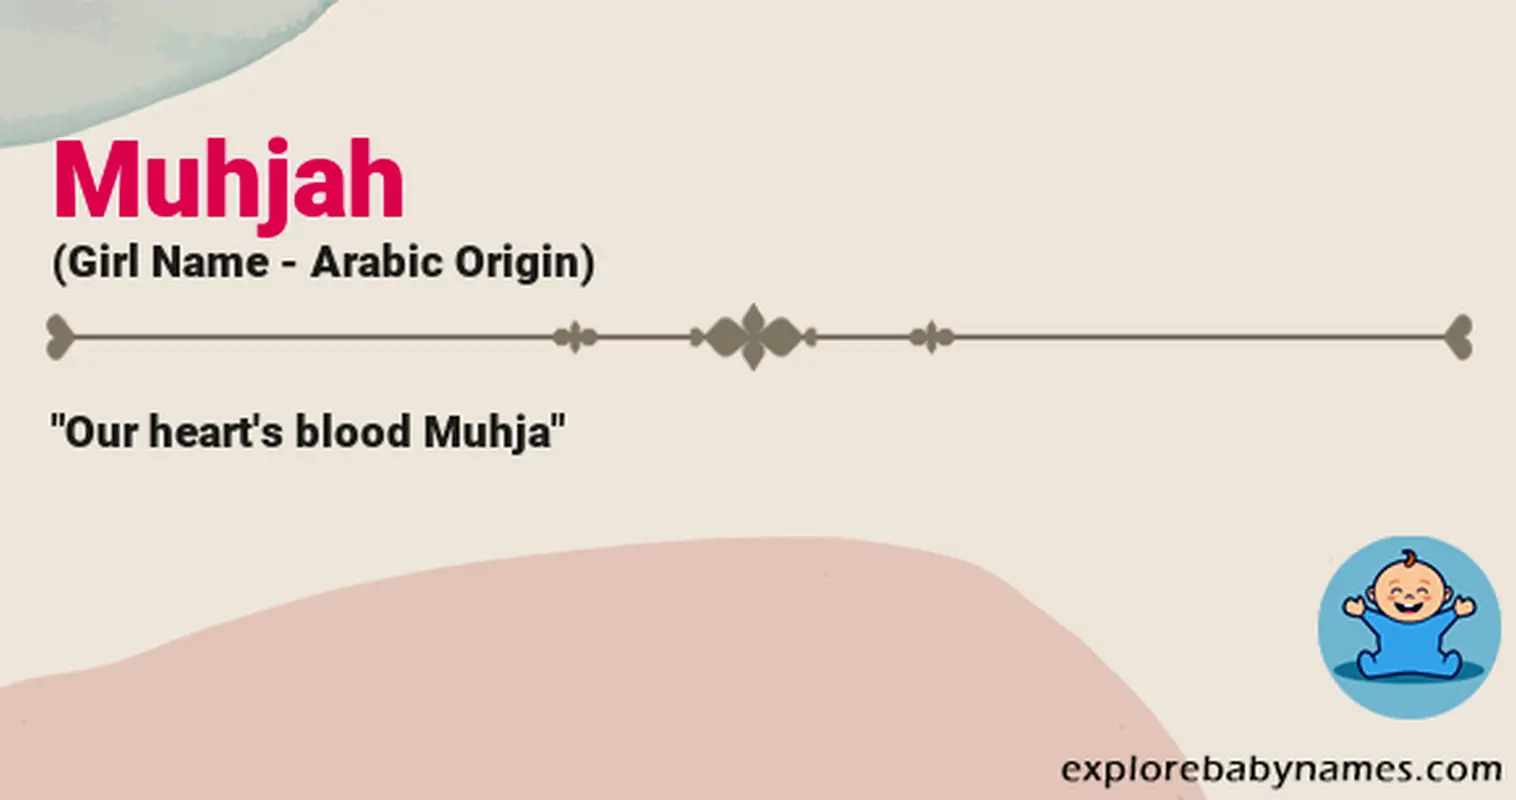 Meaning of Muhjah